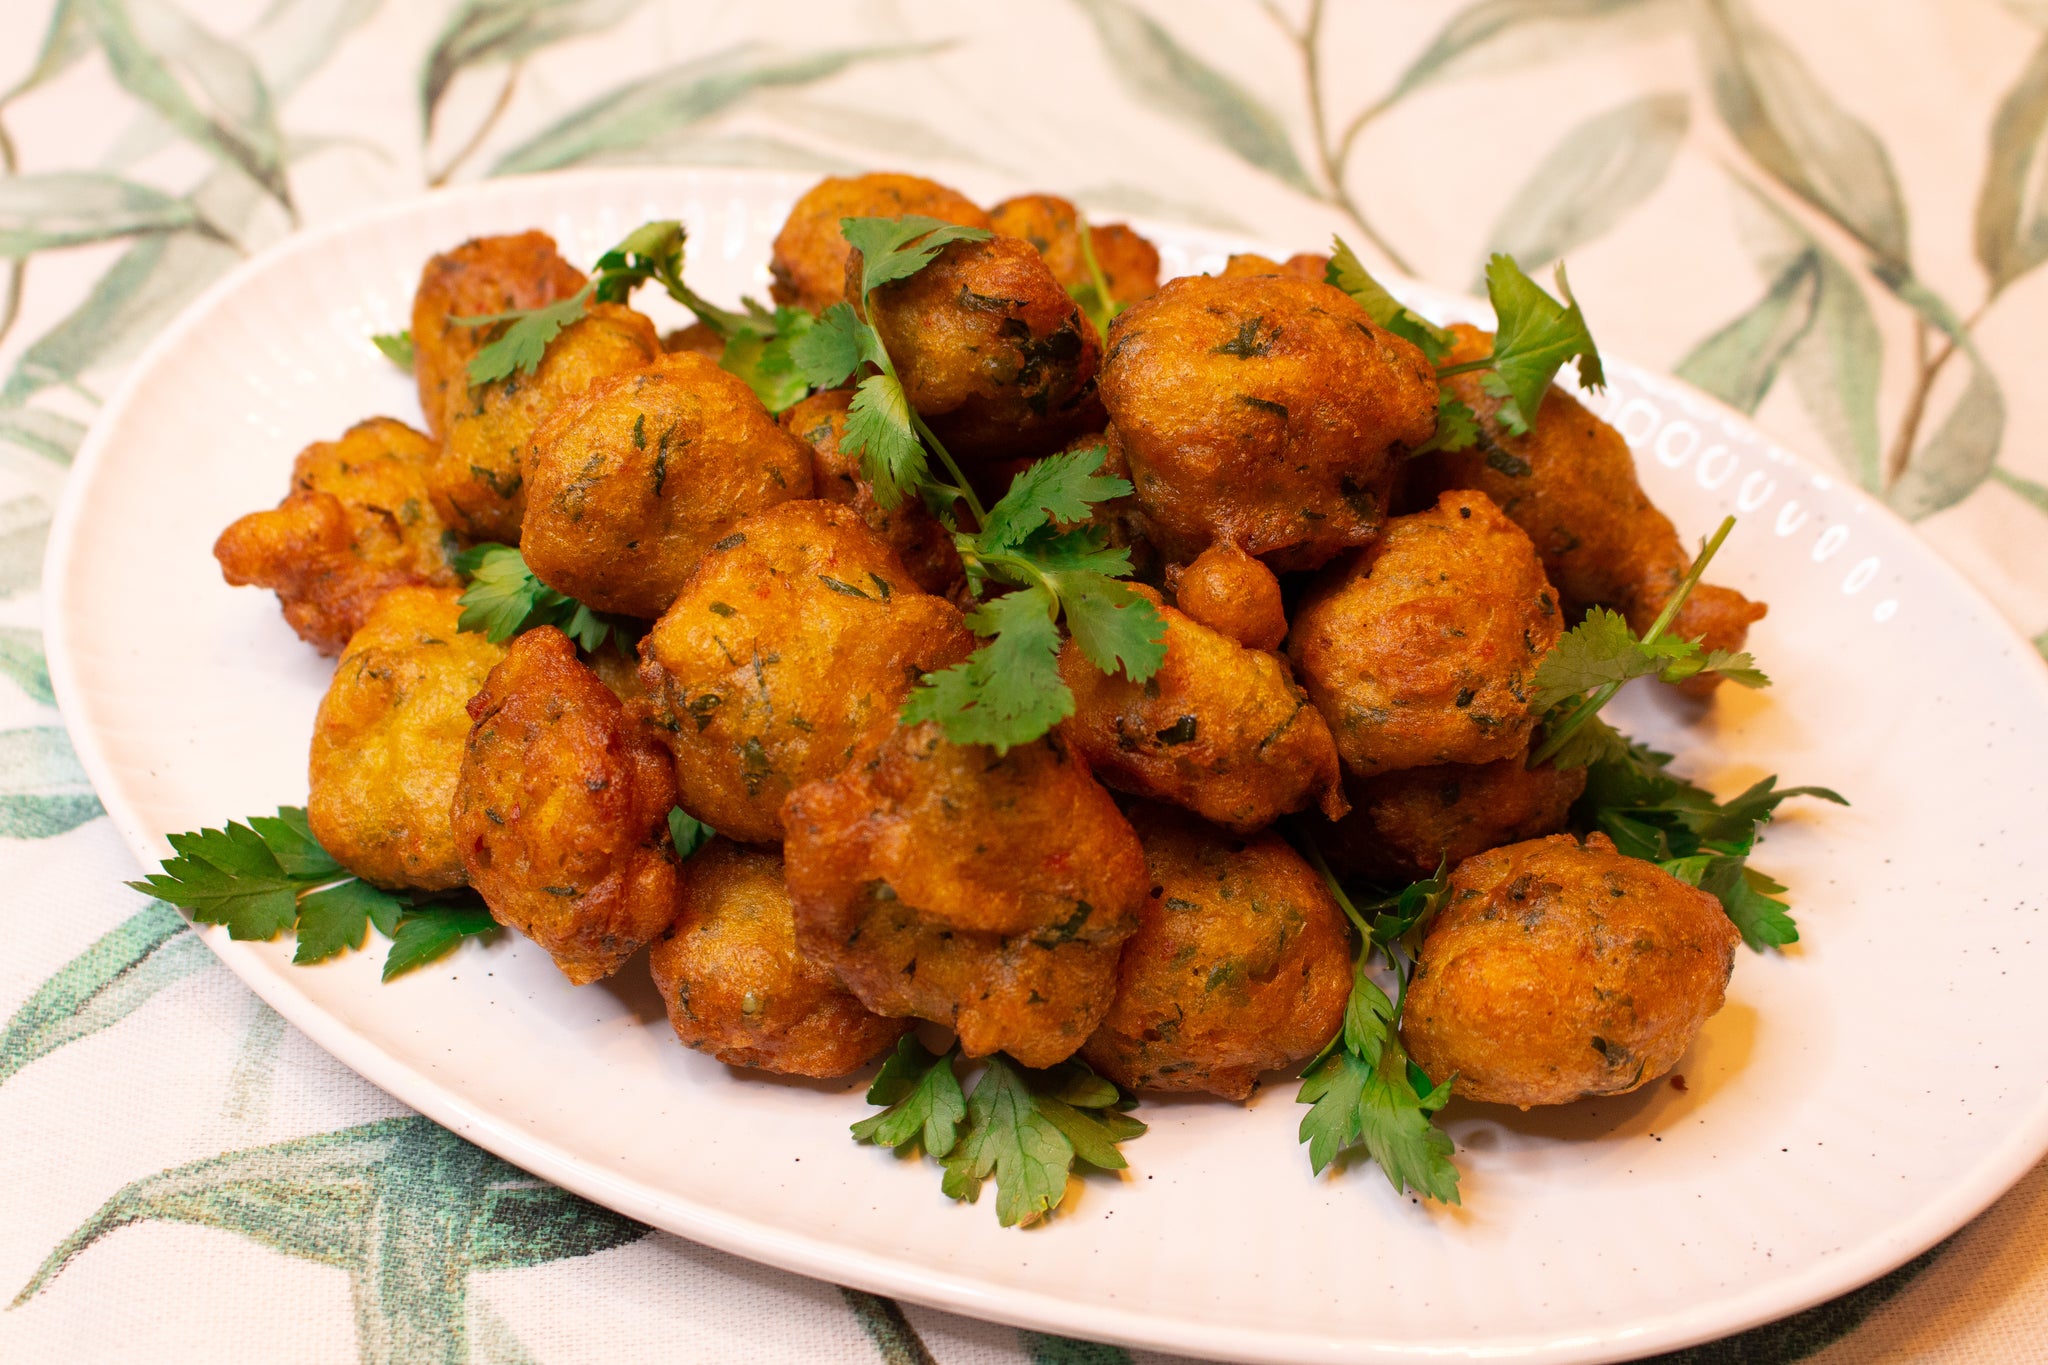 PLANTAIN AND SPLIT PEA FRITTERS RECIPE